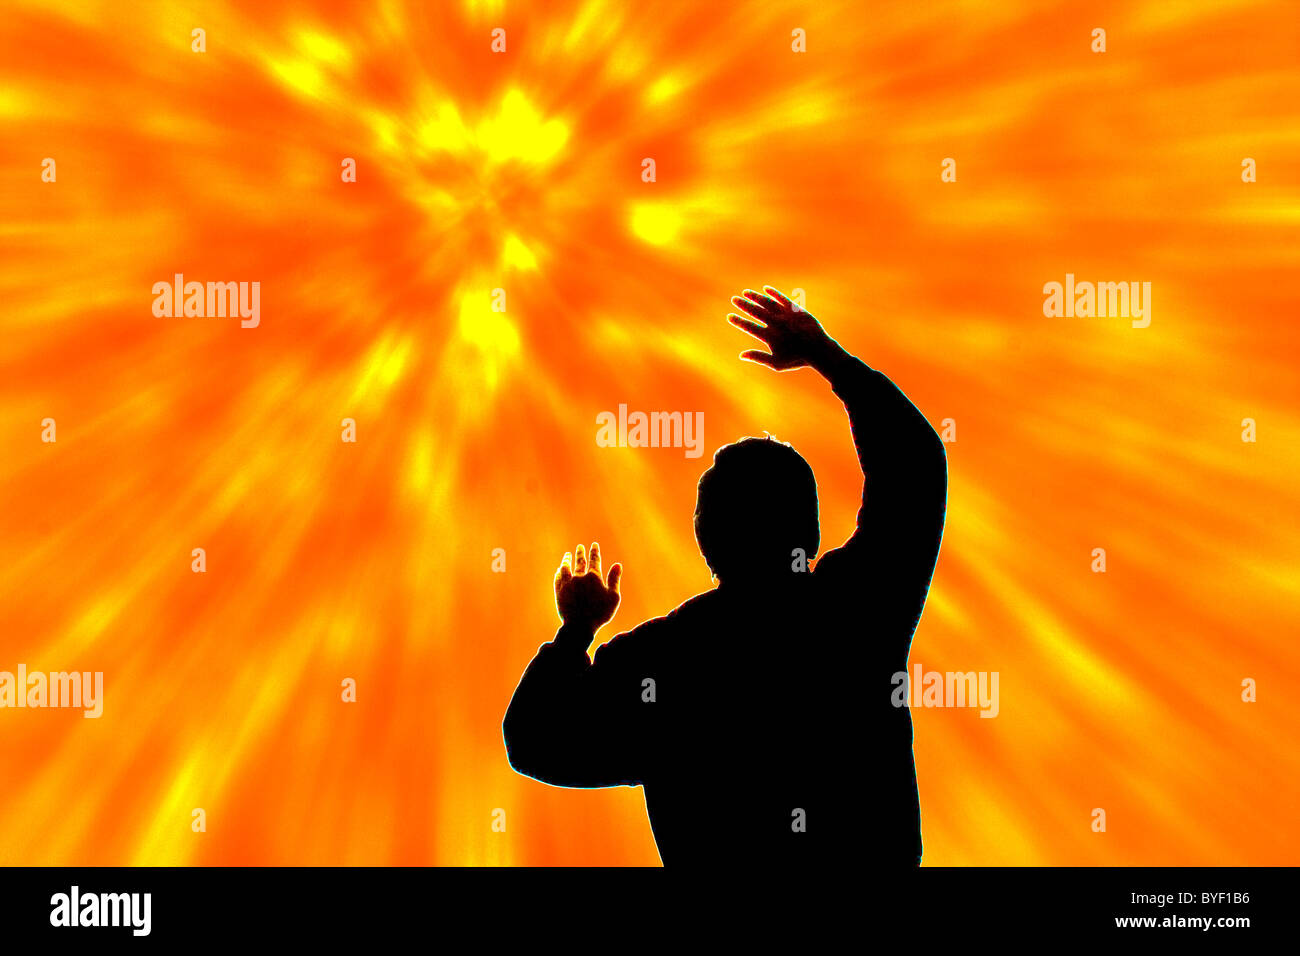 Man struck by yellow and orange beams of light emanating from above Stock Photo